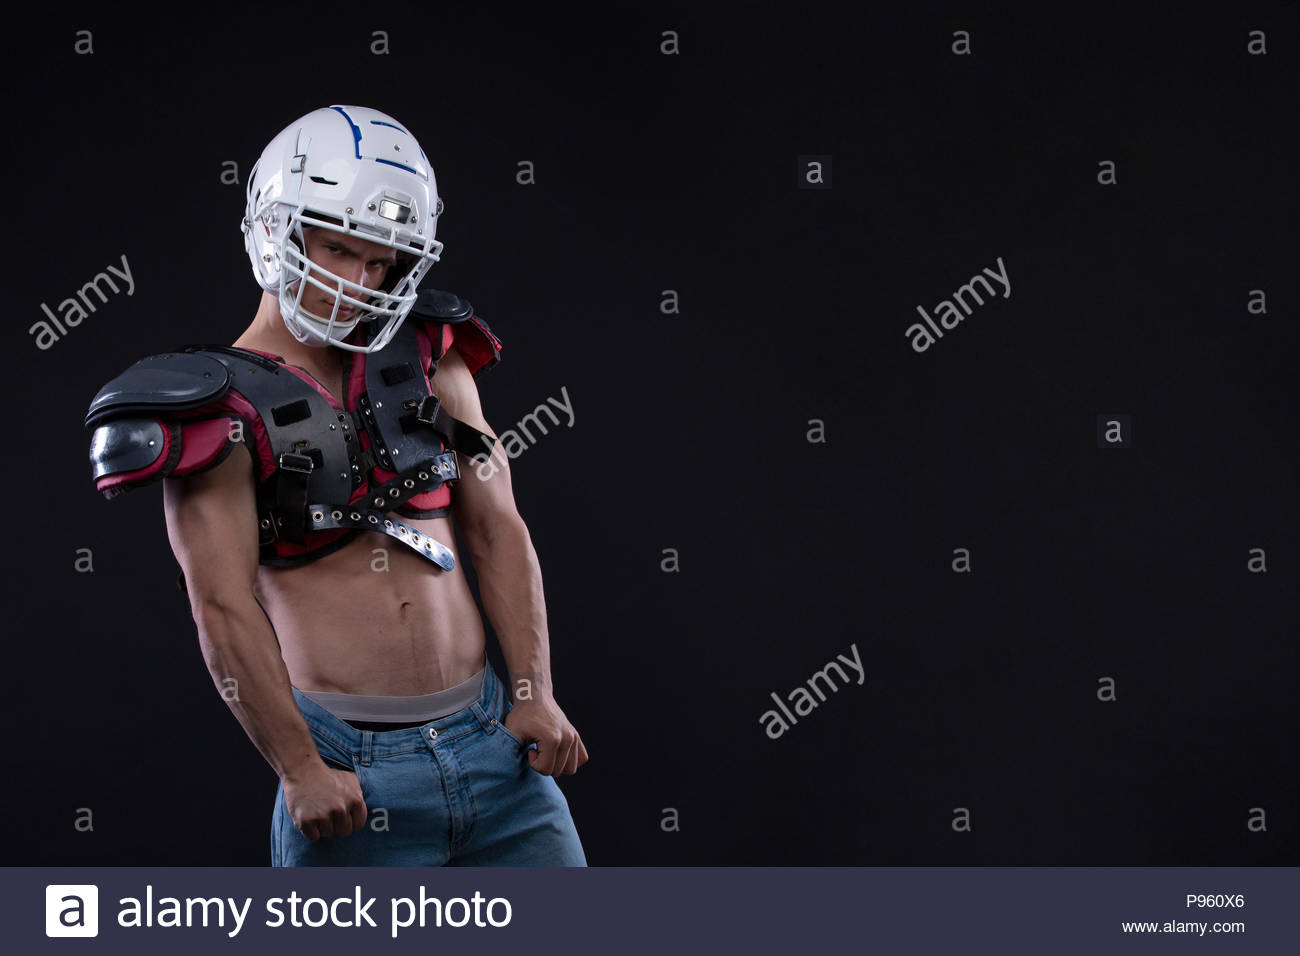 American football player wearing helmet and protective shields on